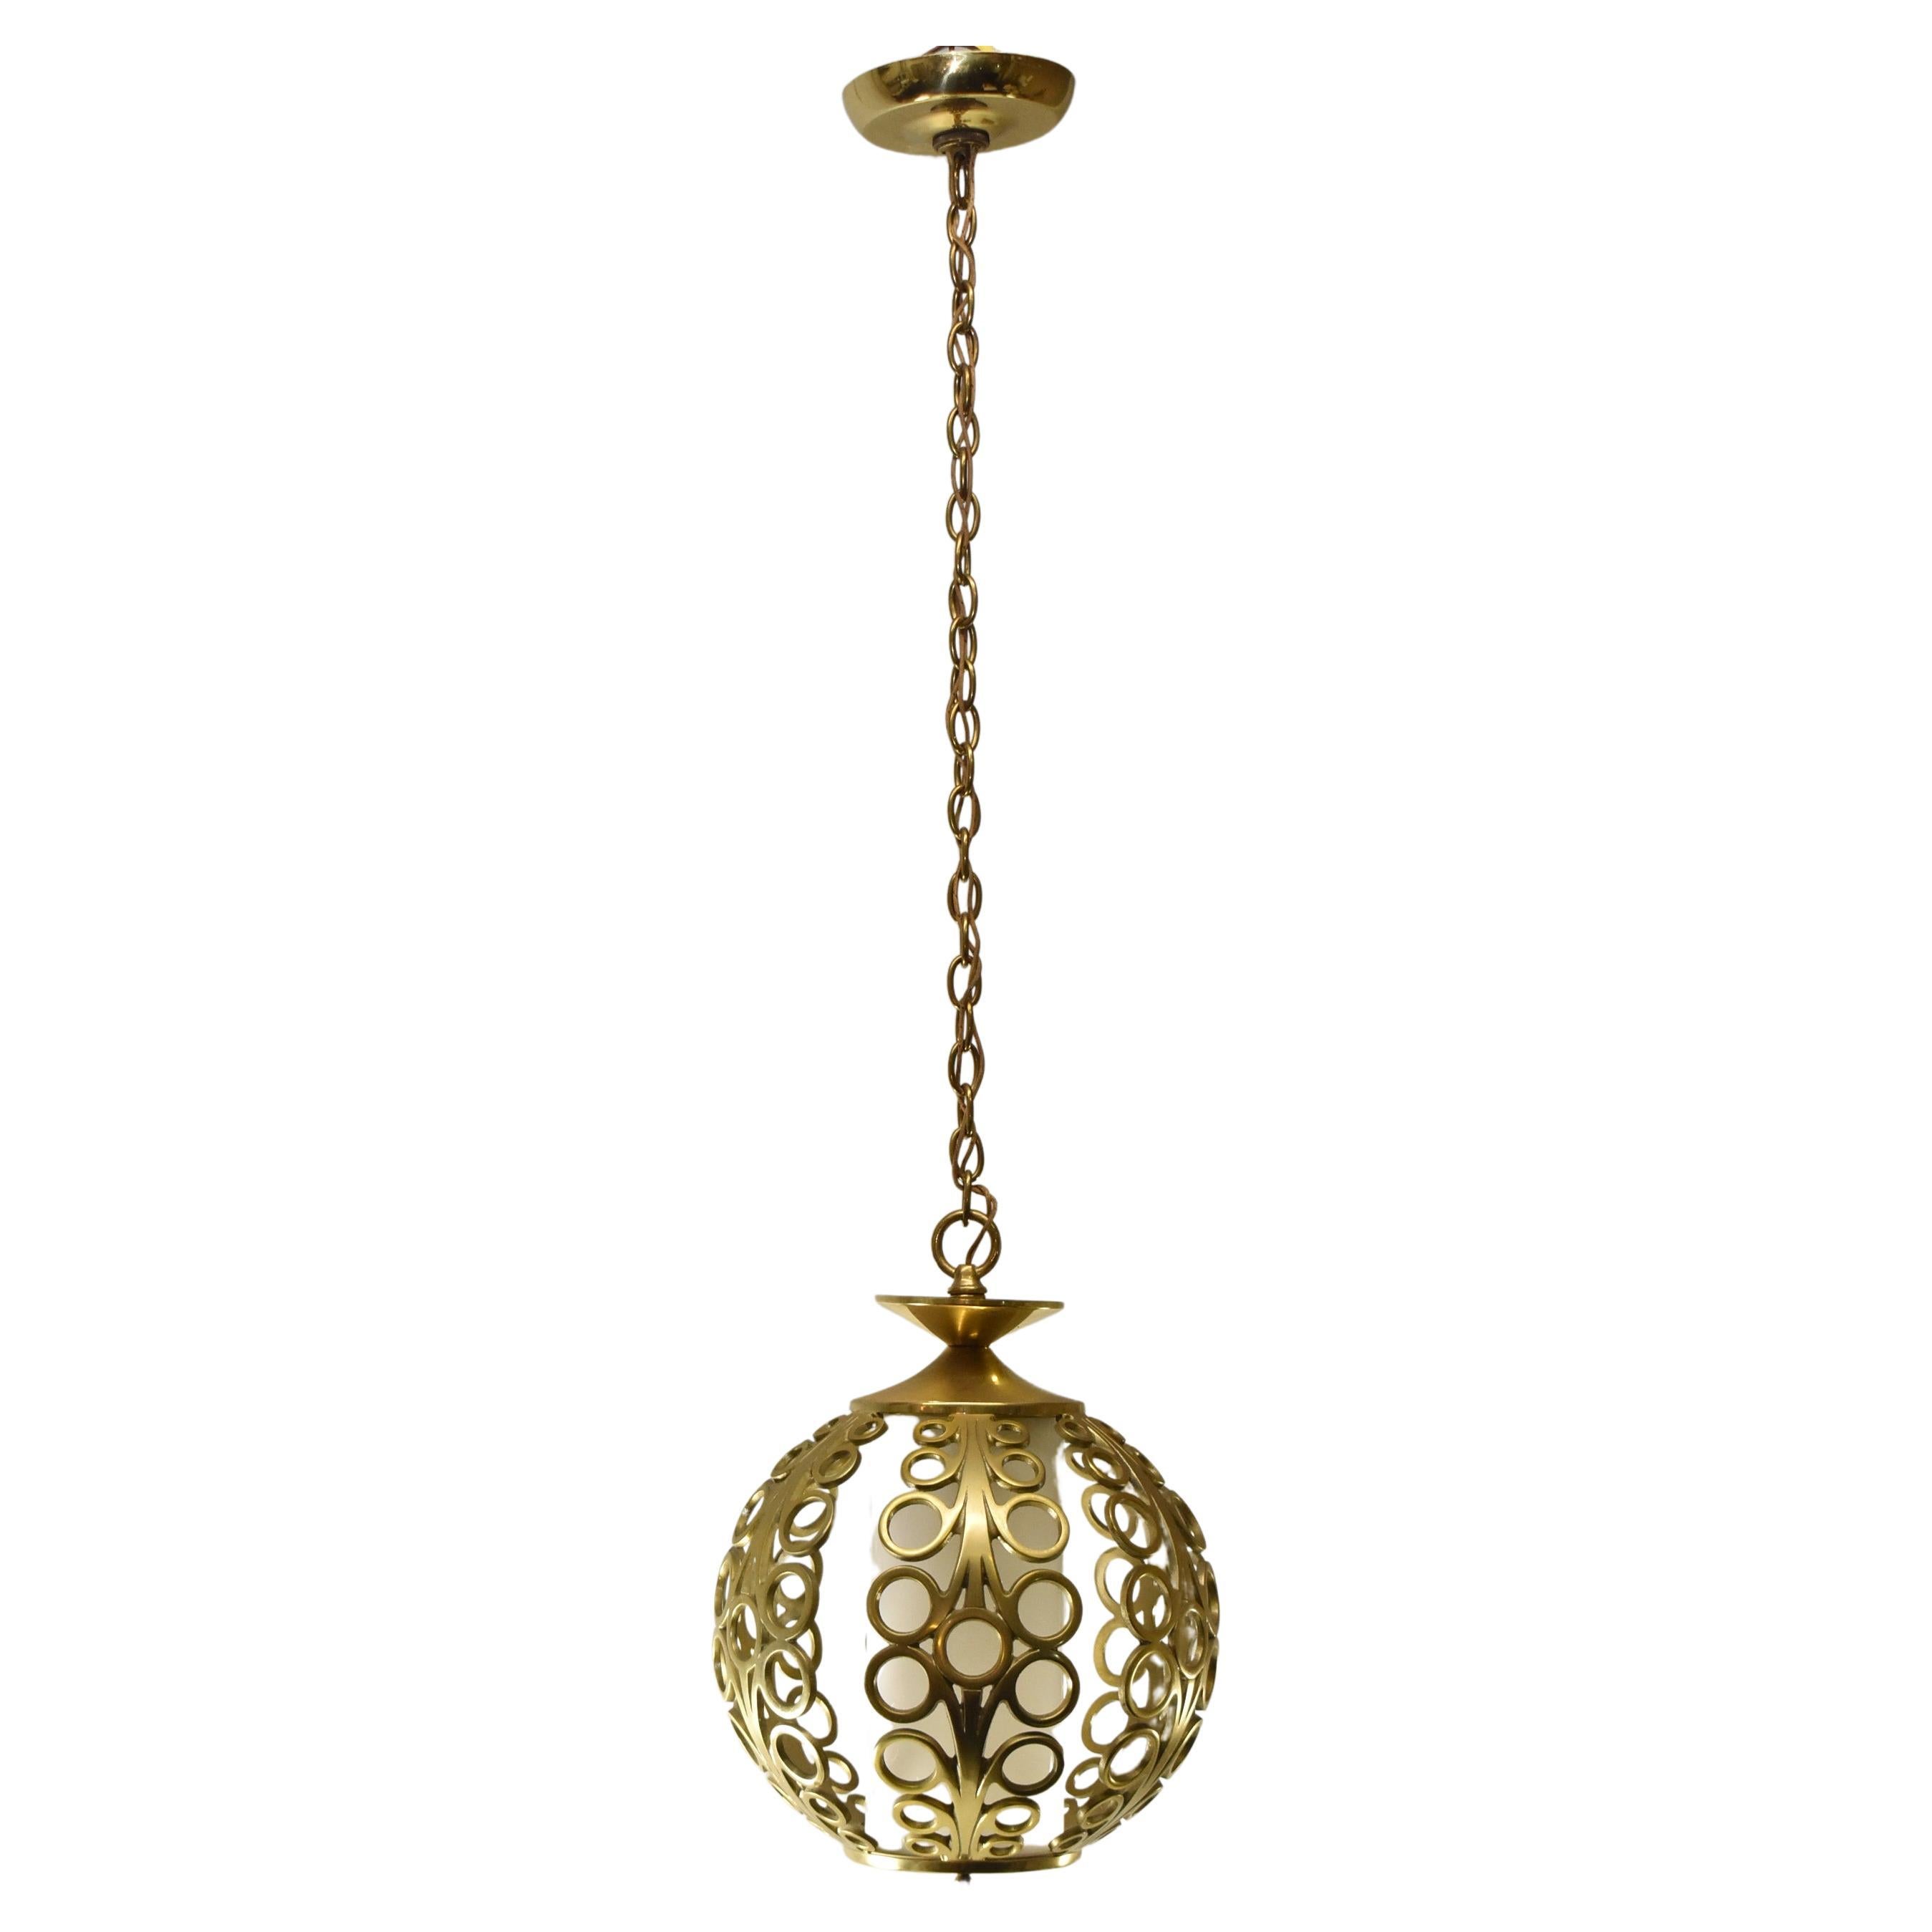 Vintage Modern Hollywood Regency Brass Round Chandelier Pendant with open work design, single socket with opaque white diffuser shade. Pendant is 11 1/2